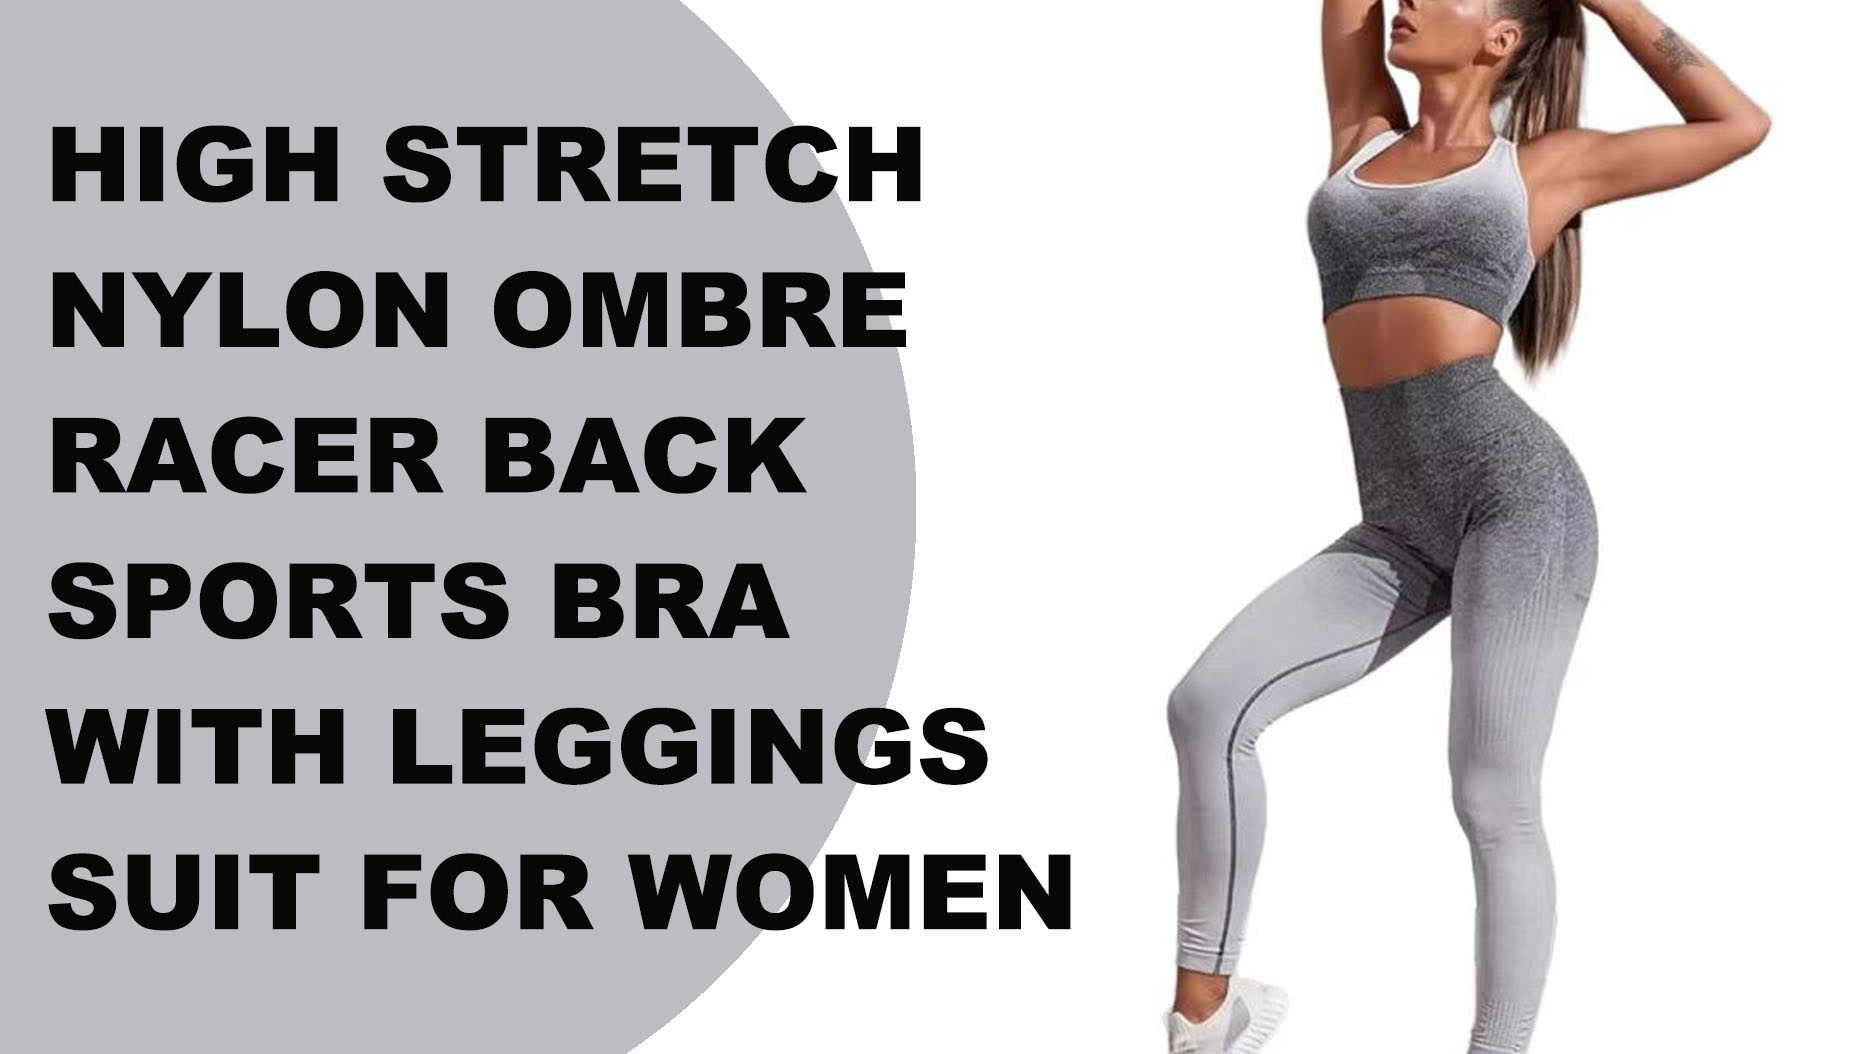 High stretch nylon Ombre Racer Back Sports Bra With Leggings suit for women